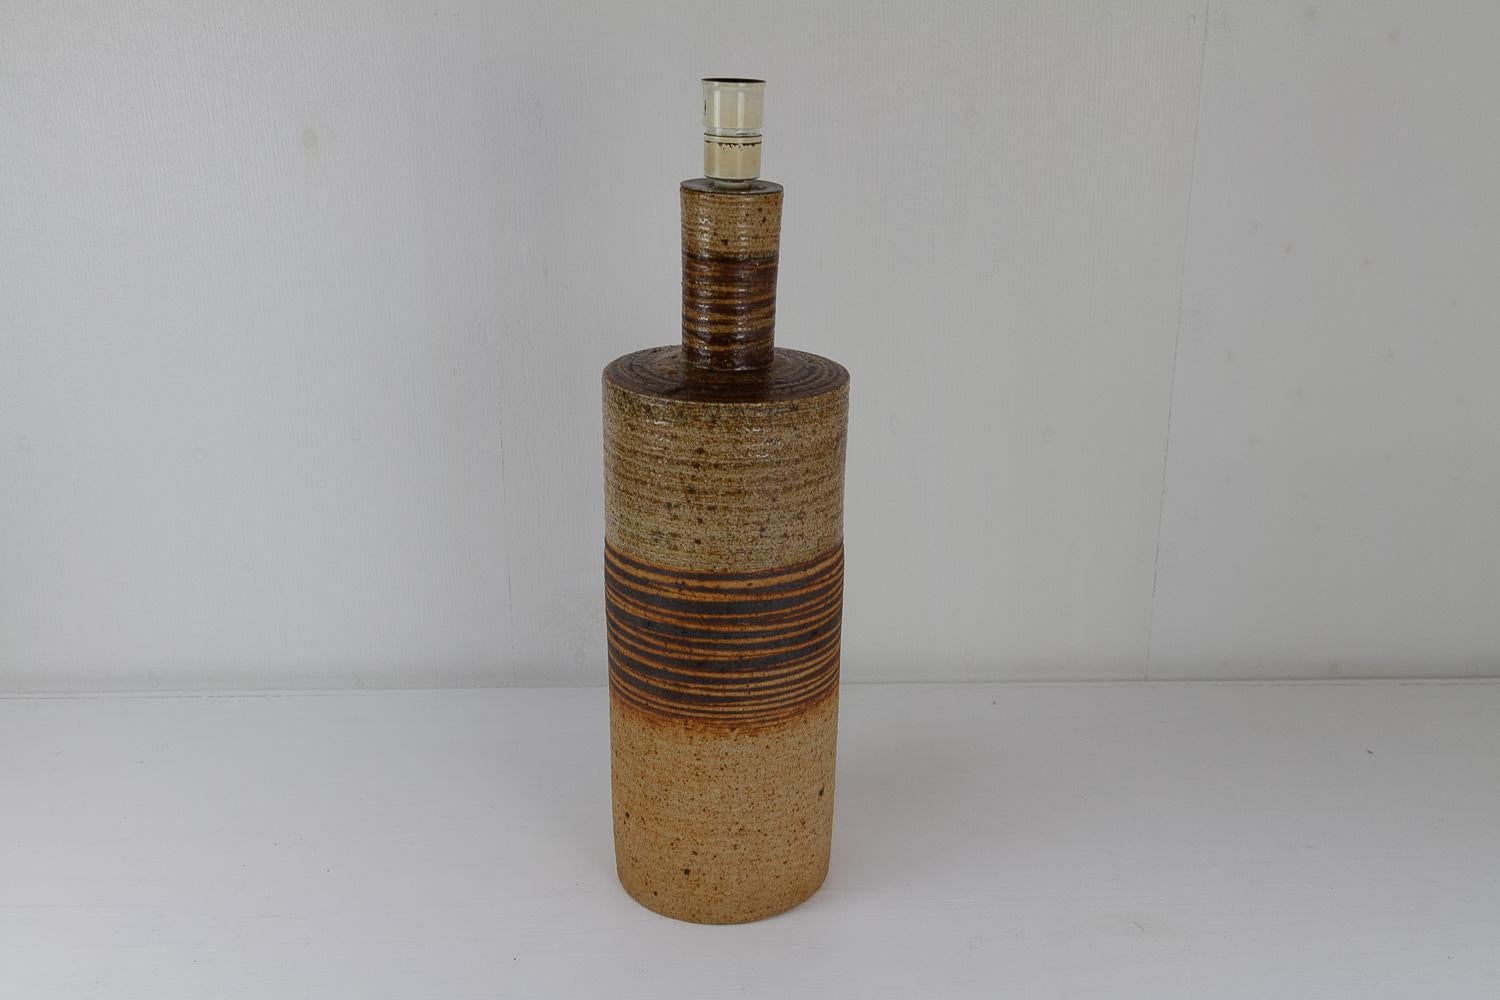 Danish Modern Tue Poulsen Ceramic Floor Lamp, 1960s.
Rustic large and impressive hand crafted Scandinavian Modern ceramic lamp in stoneware produced by Danish artist Tue Poulsen in Denmark in the 1960s.
Beautiful earth colors and tactile